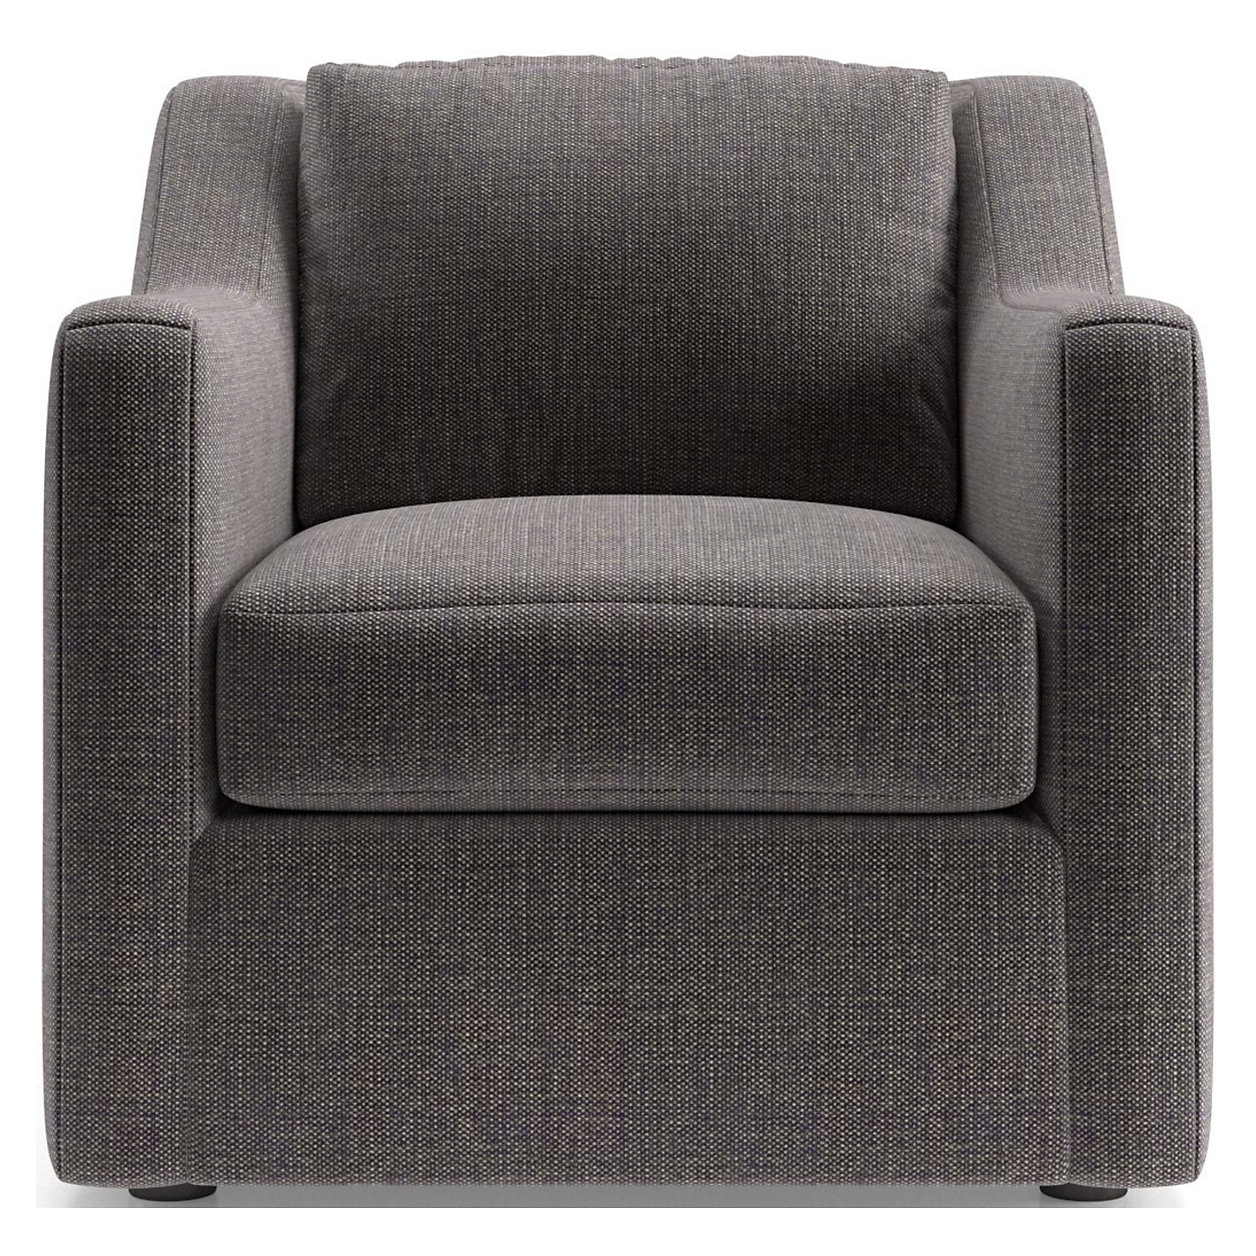 Notch Accent Chair - Image 1